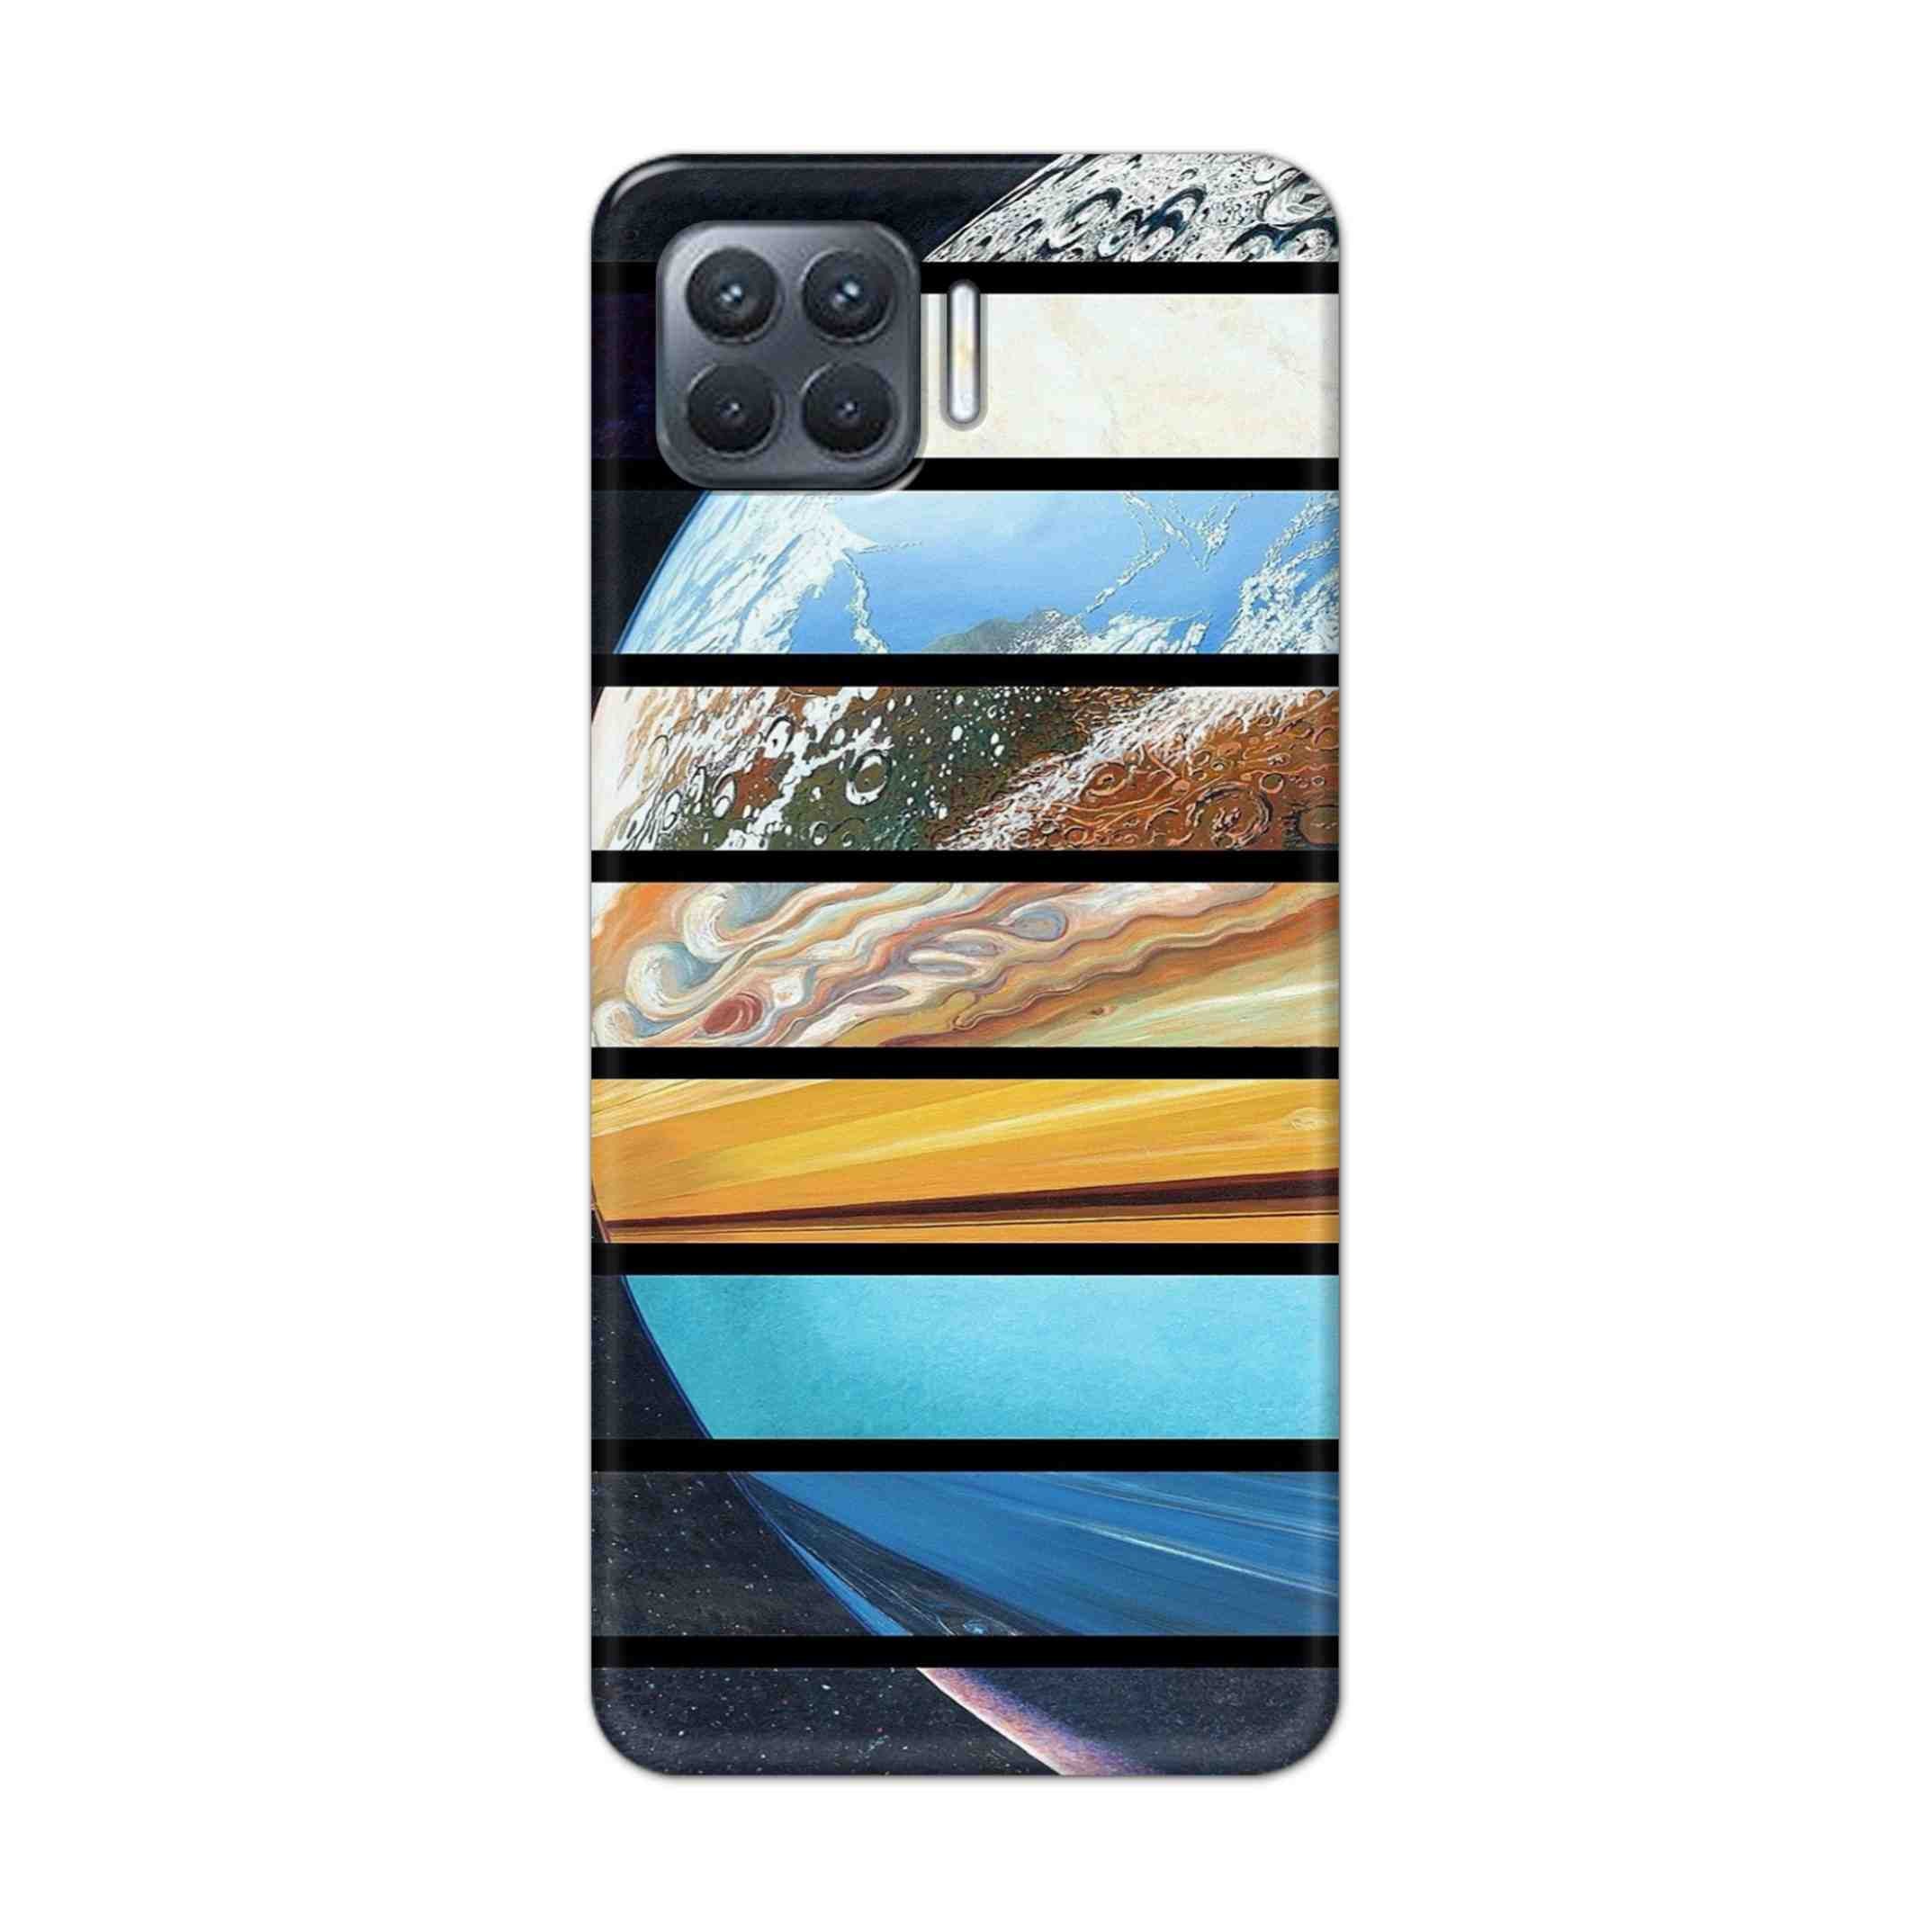 Buy Colourful Earth Hard Back Mobile Phone Case Cover For Oppo F17 Pro Online